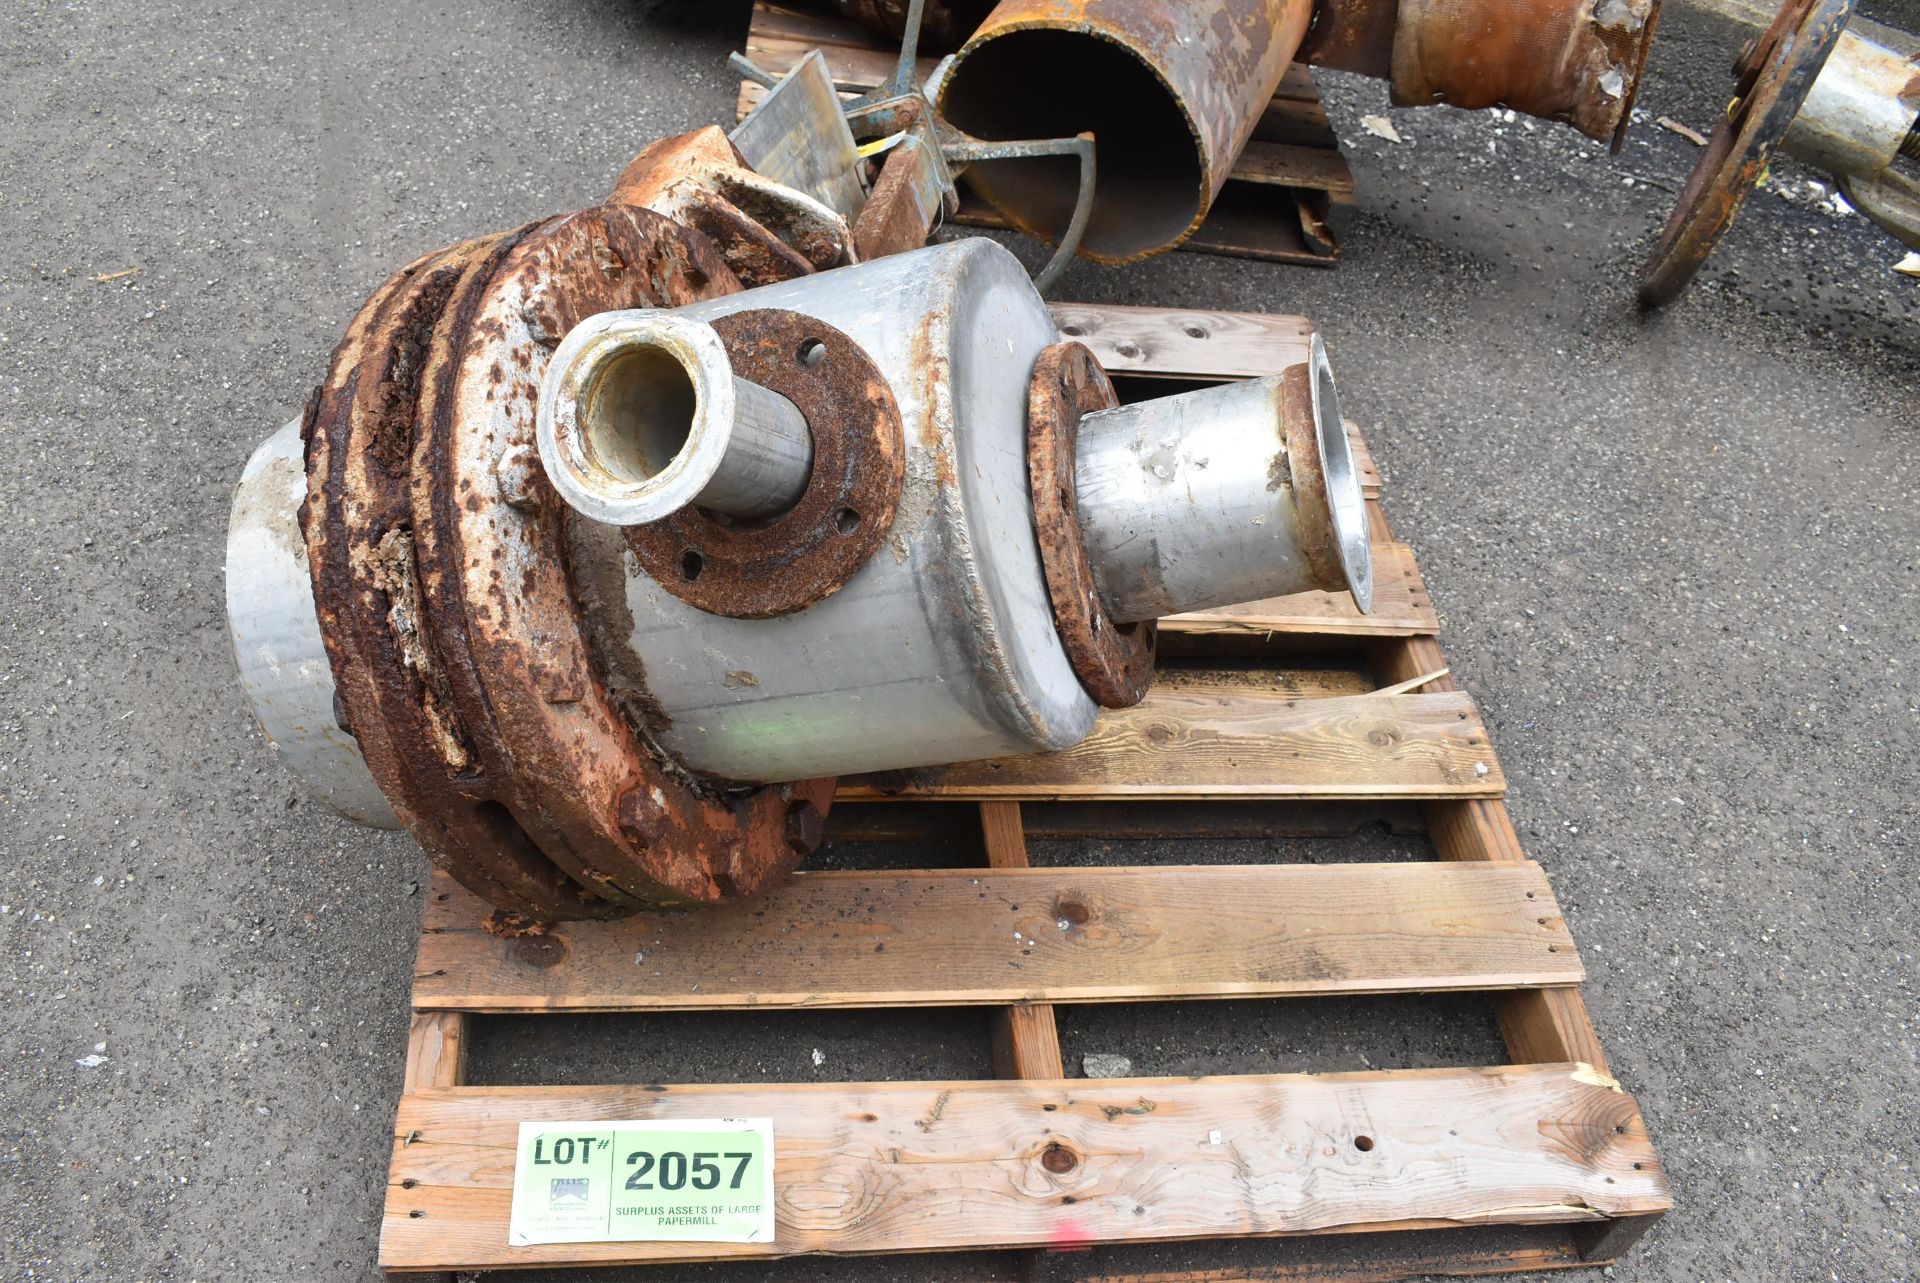 LOT/ DEZURIK 14" KNIFE VALVE WITH PIPING [RIGGING FEE FOR LOT #2057 - $25 USD PLUS APPLICABLE